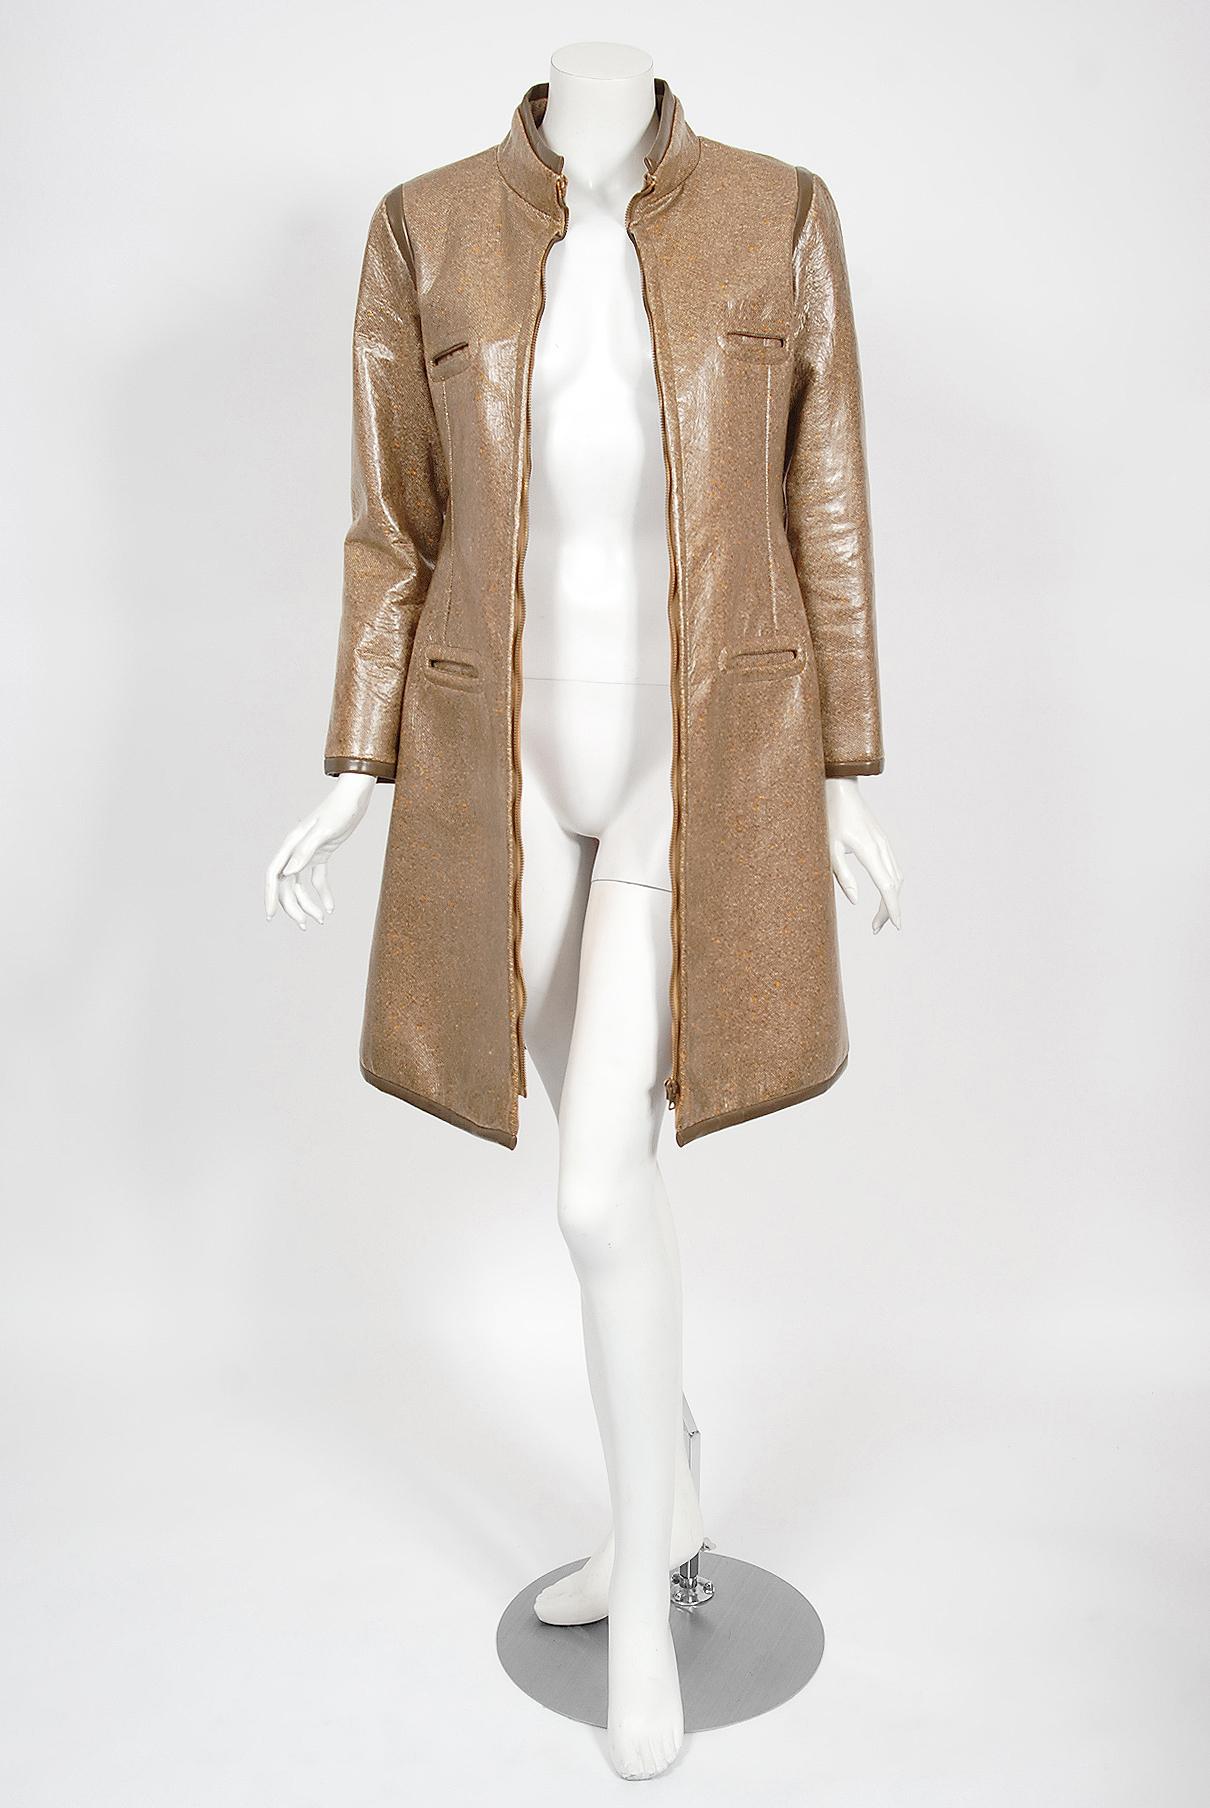 Women's Vintage 1968 Pierre Cardin Documented Vinyl Tweed Space-Age Mod Trench Jacket  For Sale